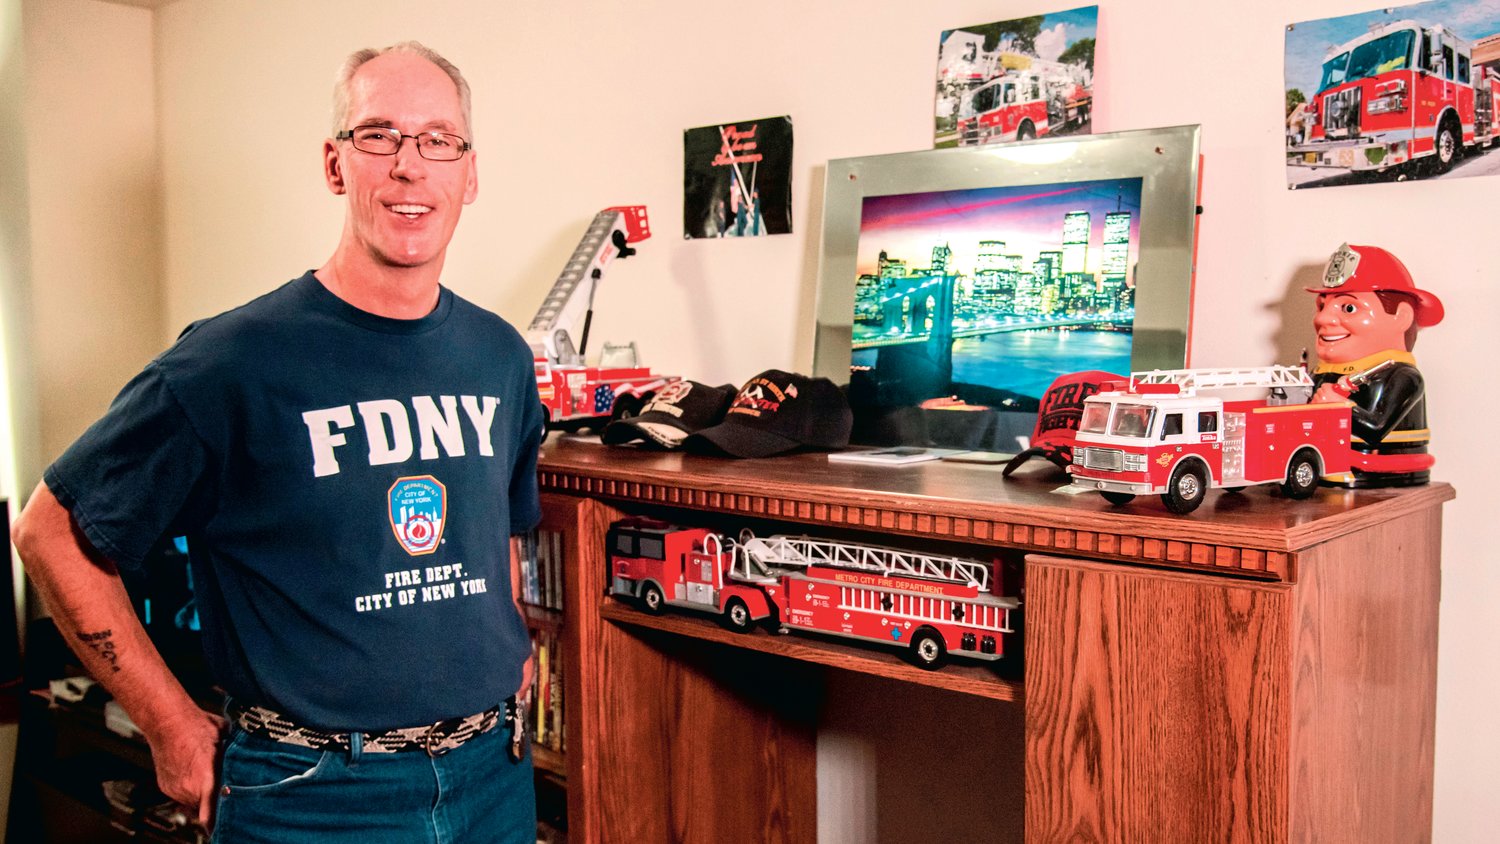 Chuck Tippett Jr. smiles and poses for a photo next to a collection of fire hats and engines displayed next to an illuminated photo of the New York City skyline in his Centralia residence. Tippett Jr. also sports his “FDNY” shirt he received while working as a firefighter in the city where he helped victims during the events that unfolded on September 11, 2001. "That's my boys right there," he said Saturday while describing the fire trucks displayed in his living room.